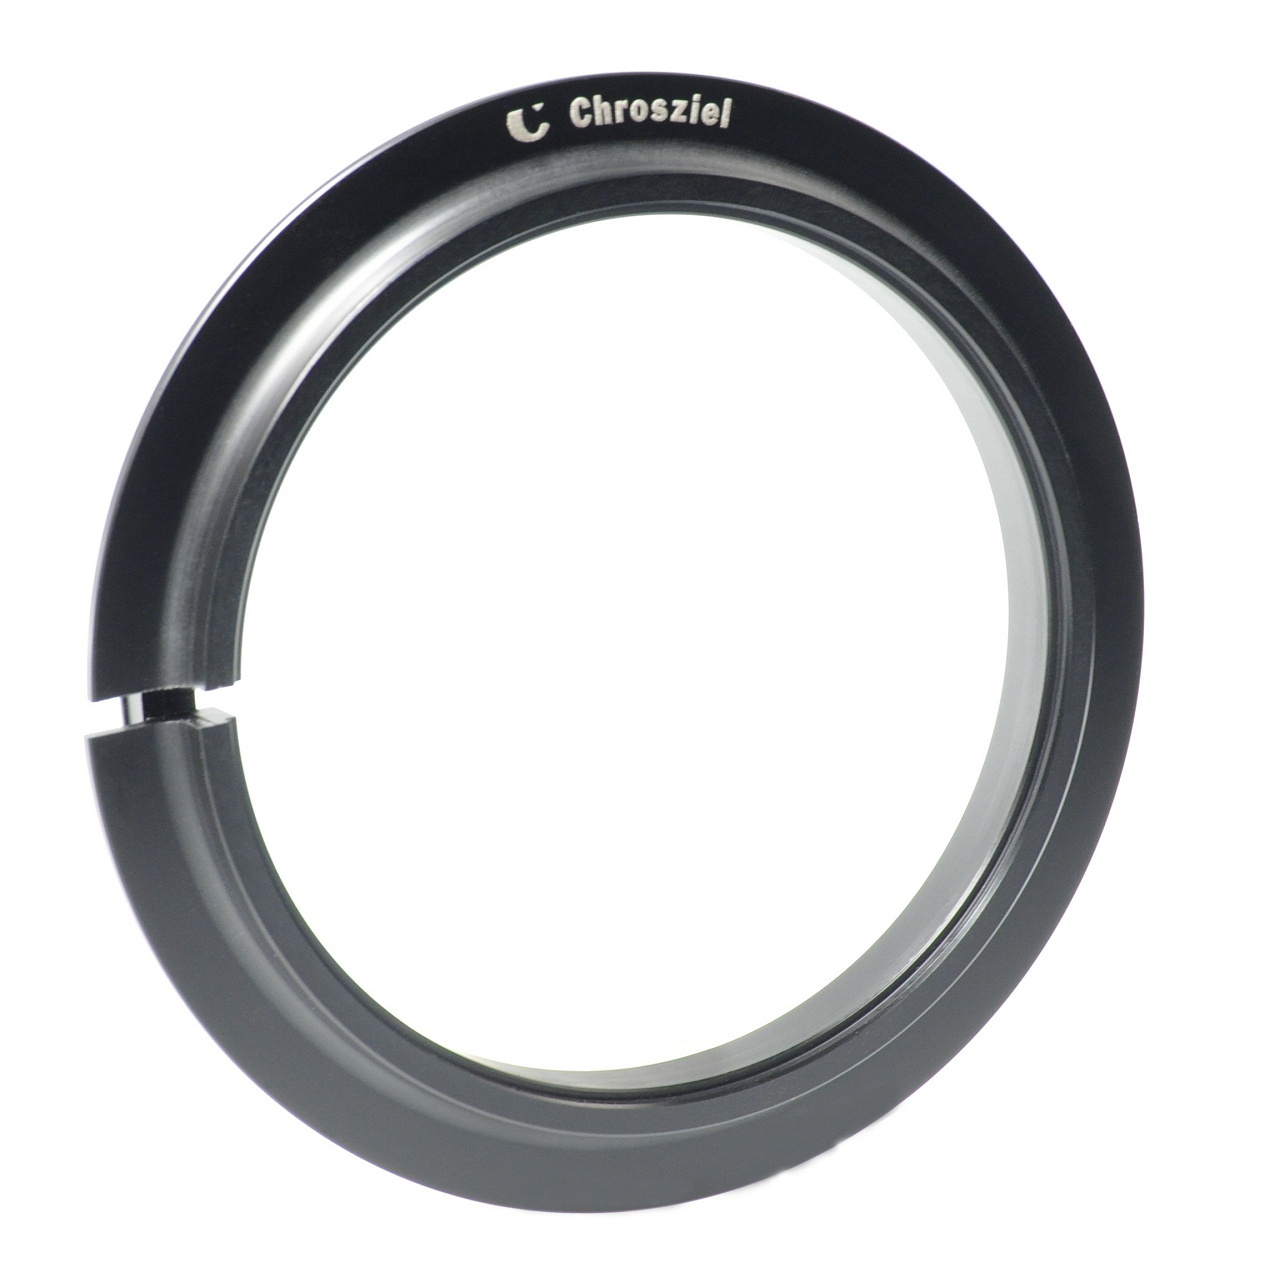 Step-down Ring Ø 110:95 mm for MB456, MB450 and SD412